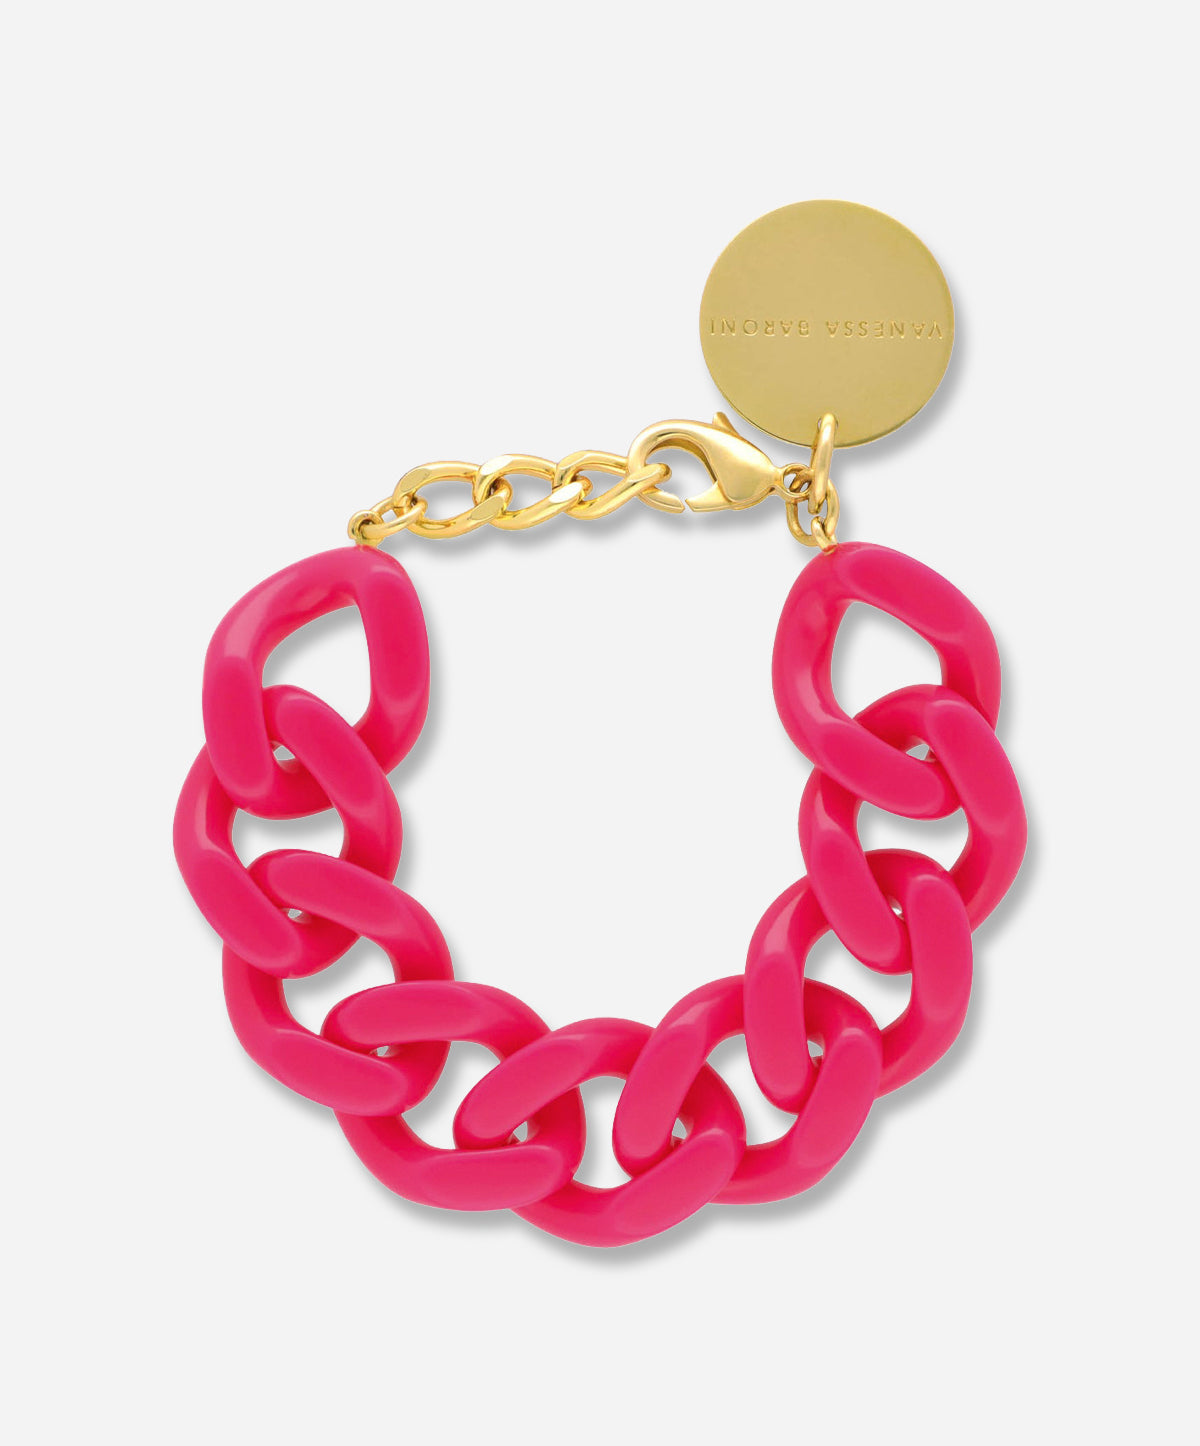 Flat Chain Bracelet | The Forme